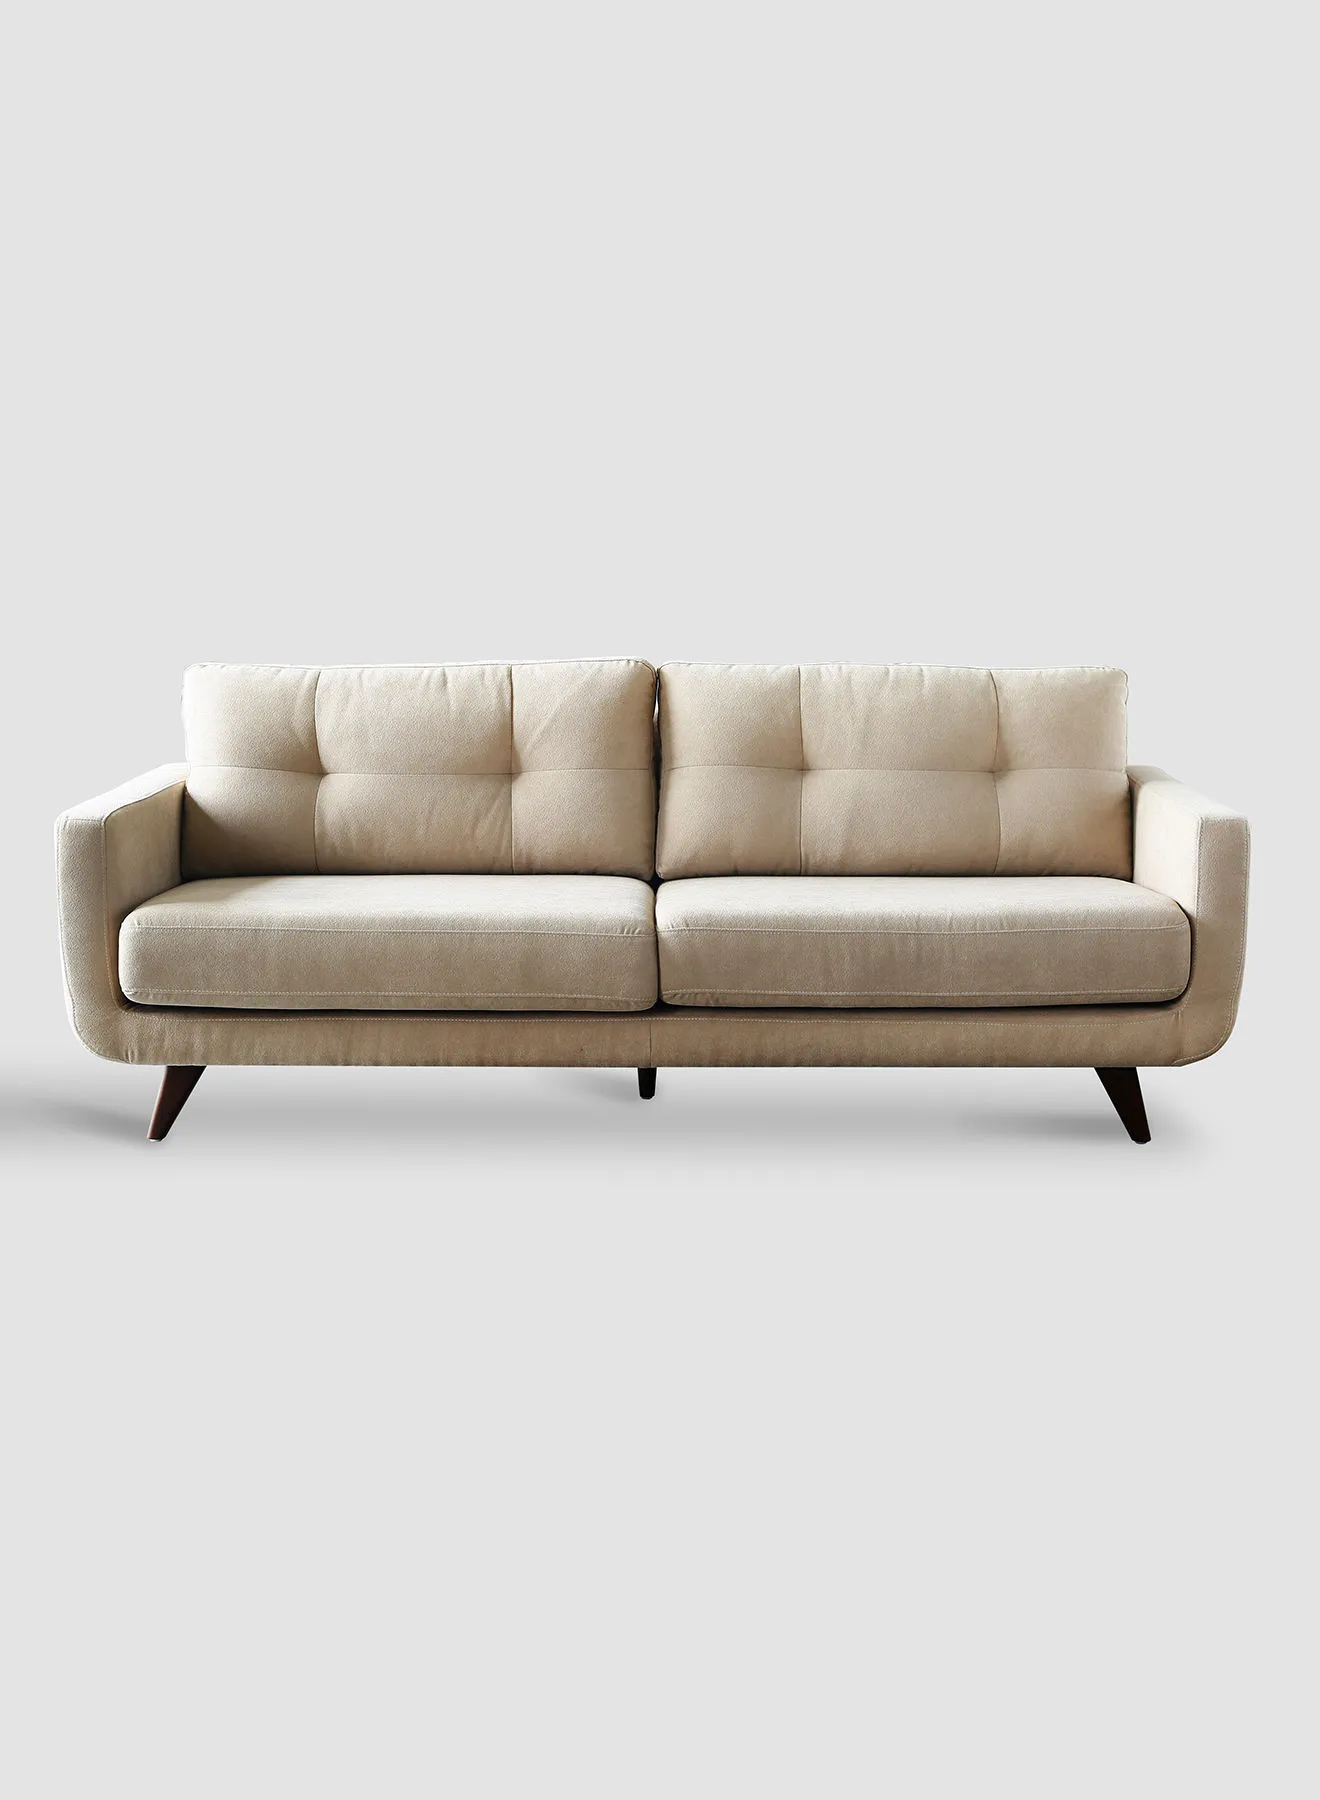 Switch Sofa - Beige Couch - 2120 X 870 X 840 - 3 Seater Sofa Relaxing Sofa